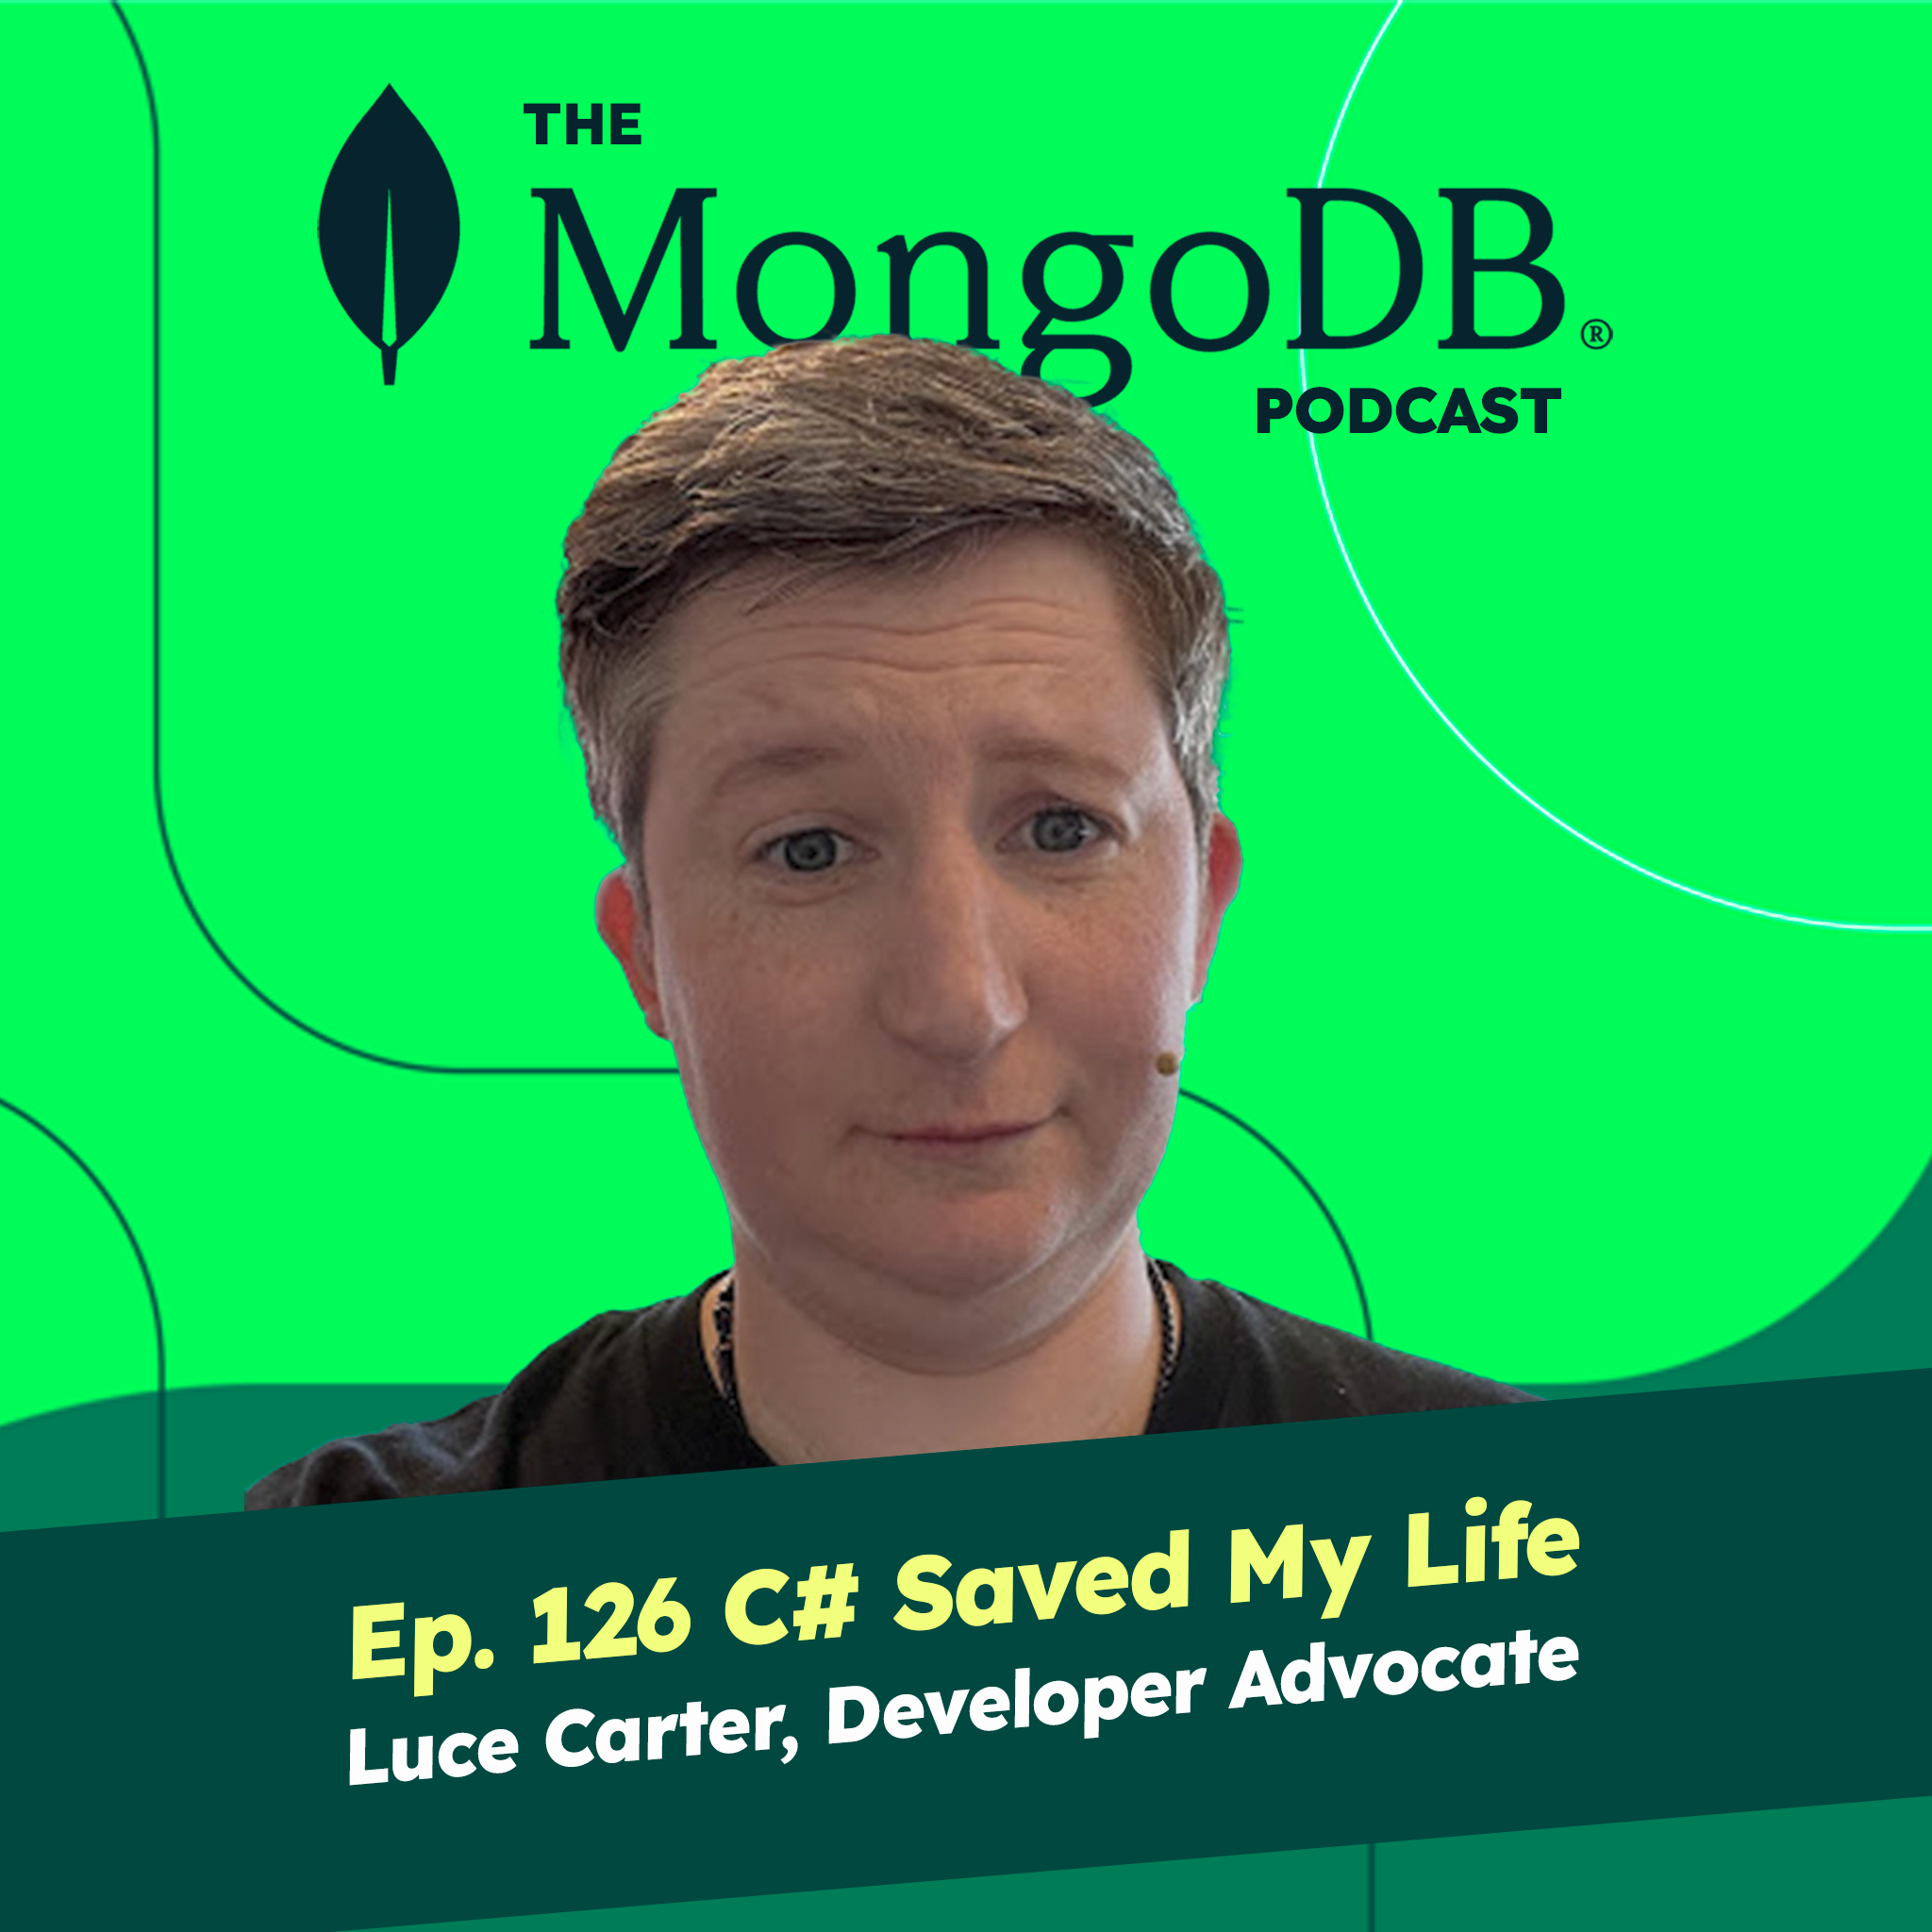 Ep. 126 C# Saved My Life with Luce Carter